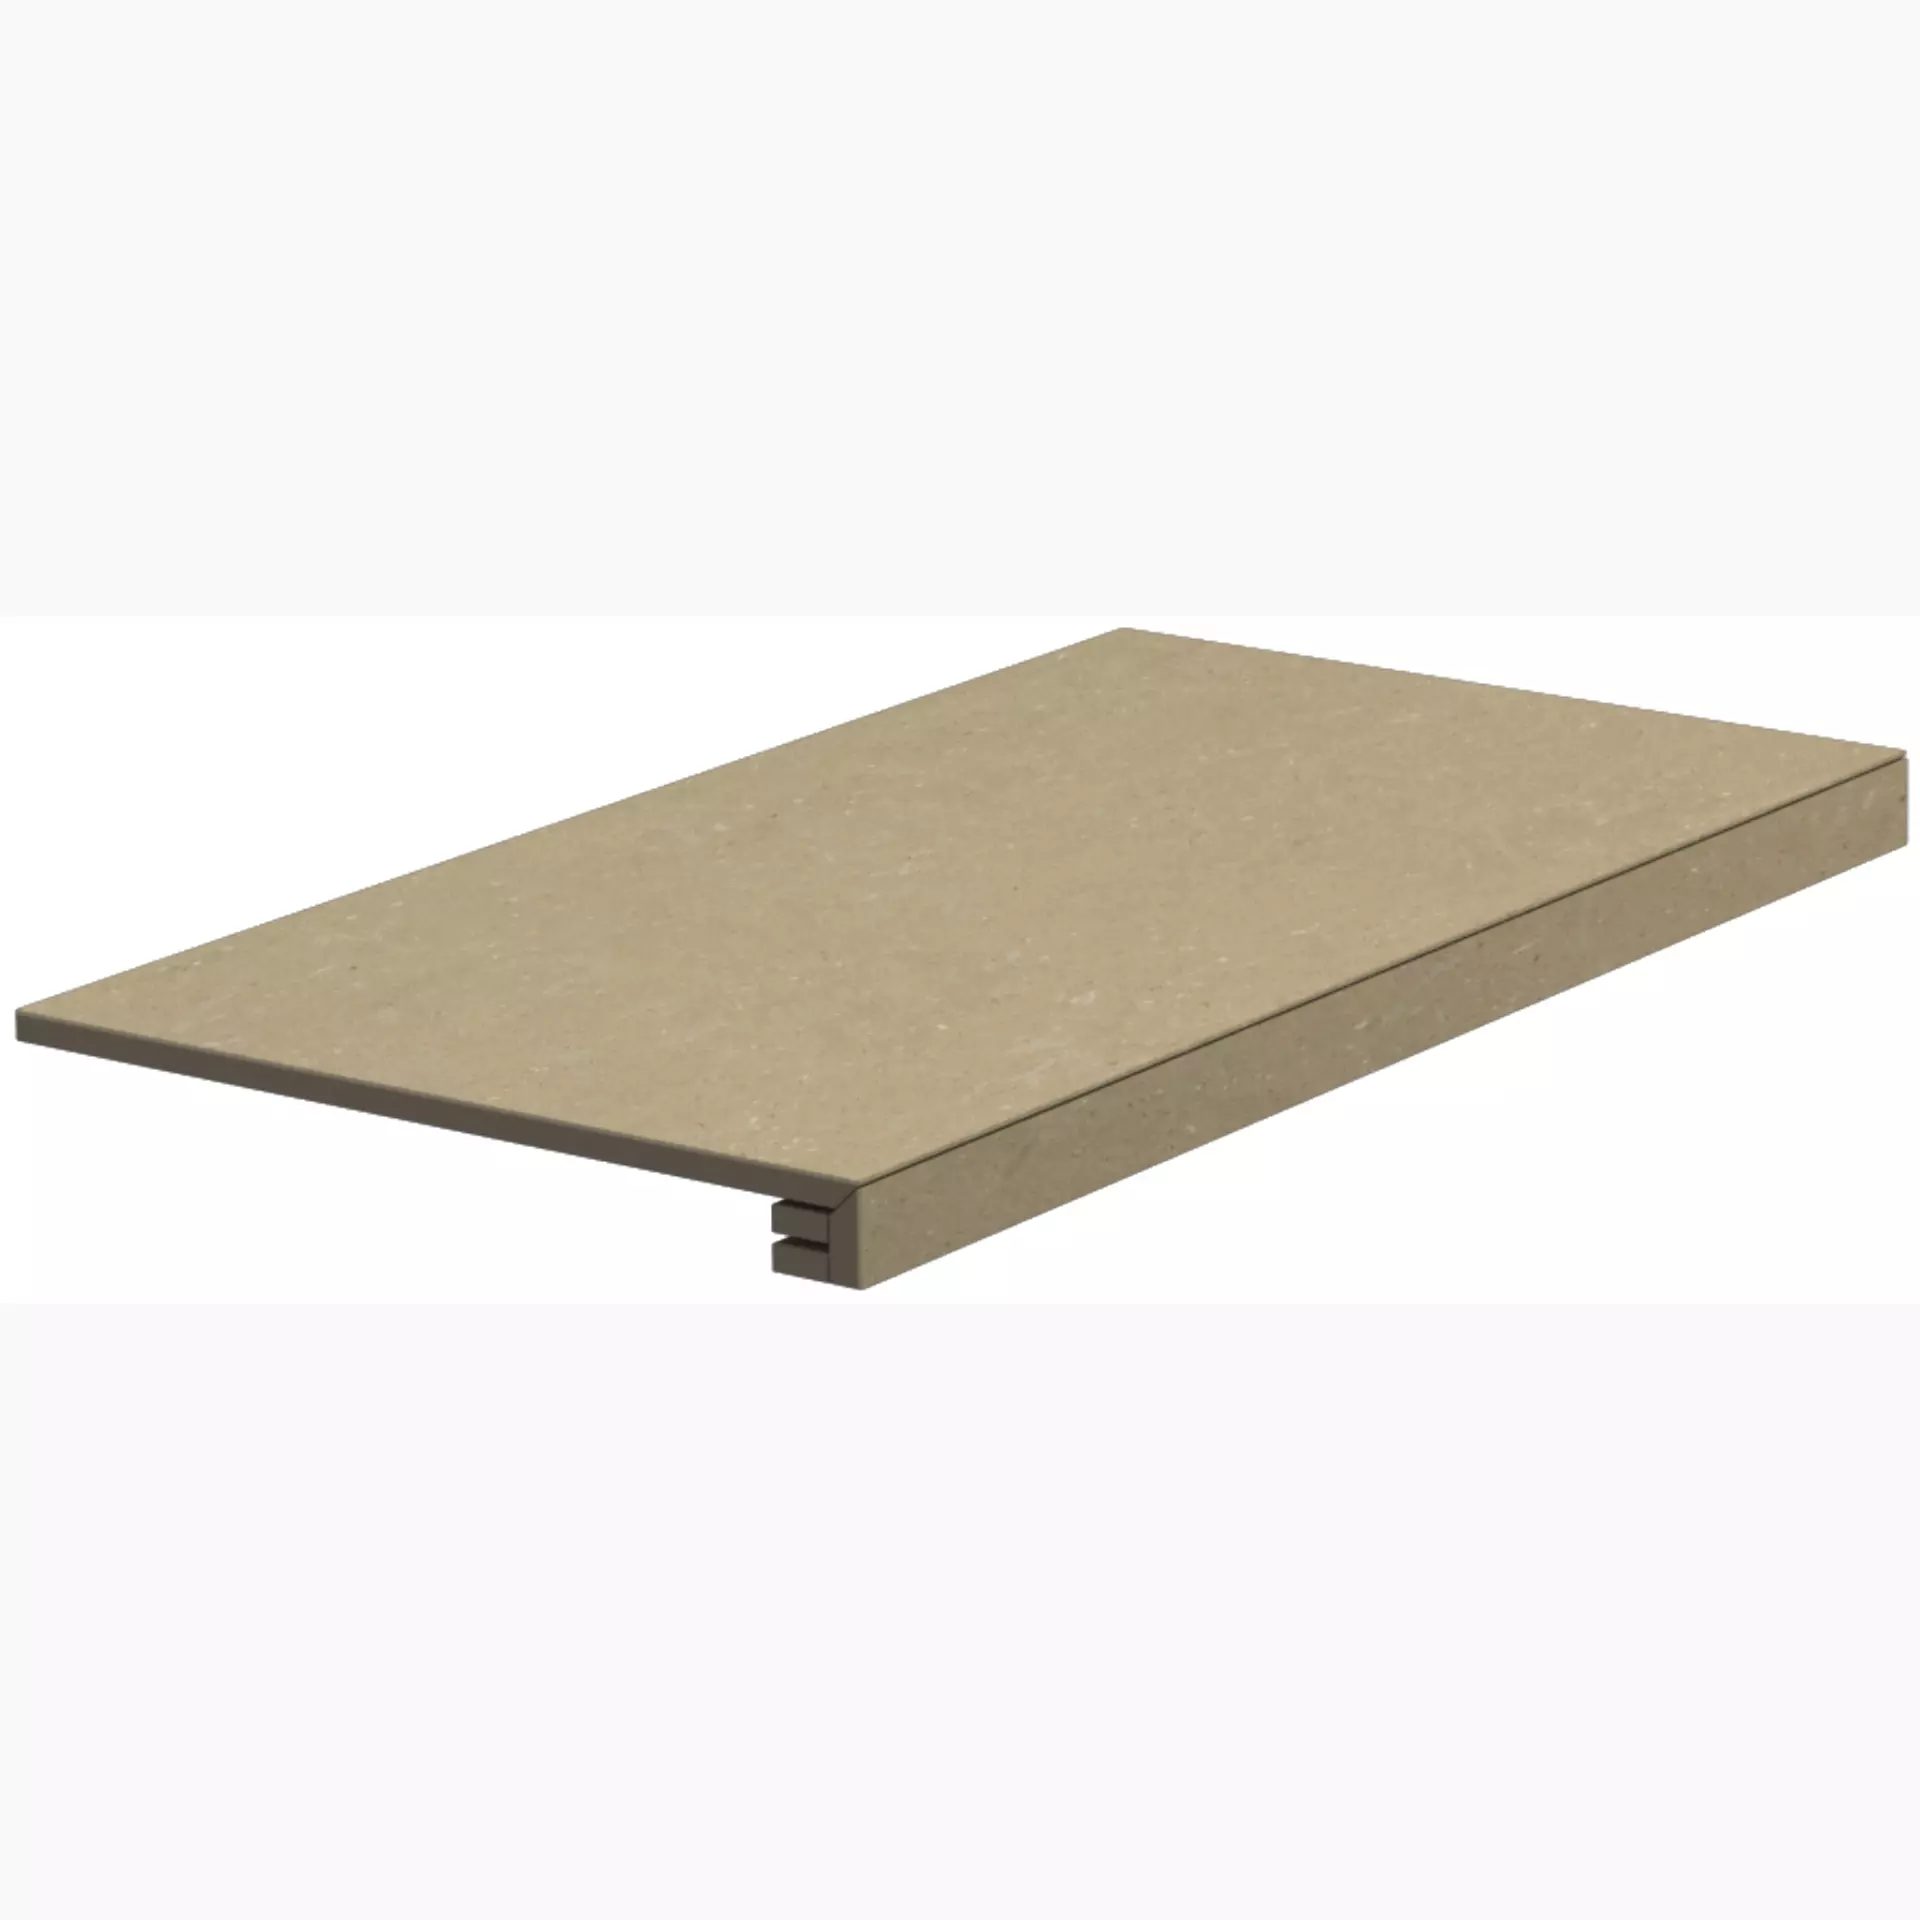 Del Conca Hwd Wild Beige Hwd01 Naturale Step plate Lineare G3WD01RG 33x60cm rectified 8,5mm